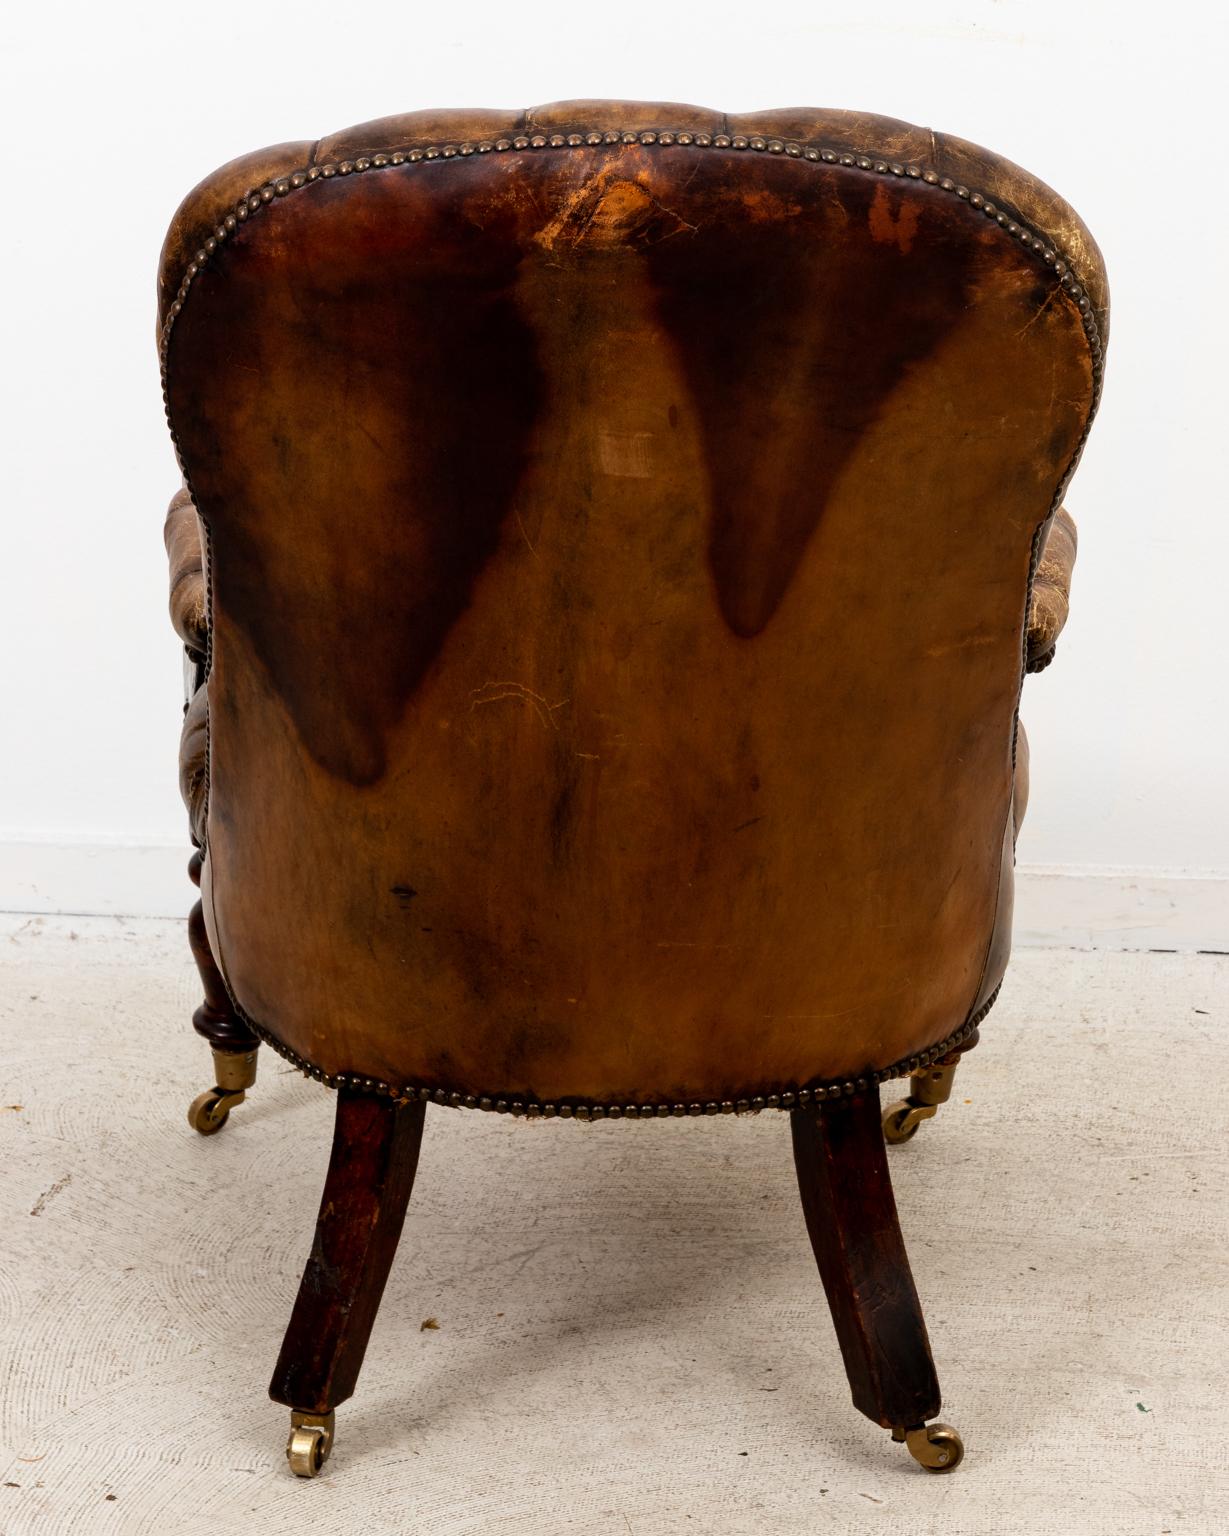 Circa 1830s English tufted leather library chair with carved, scrolled arm holds in the William IV style on castors. Made in England. Please note wear consistent with age.